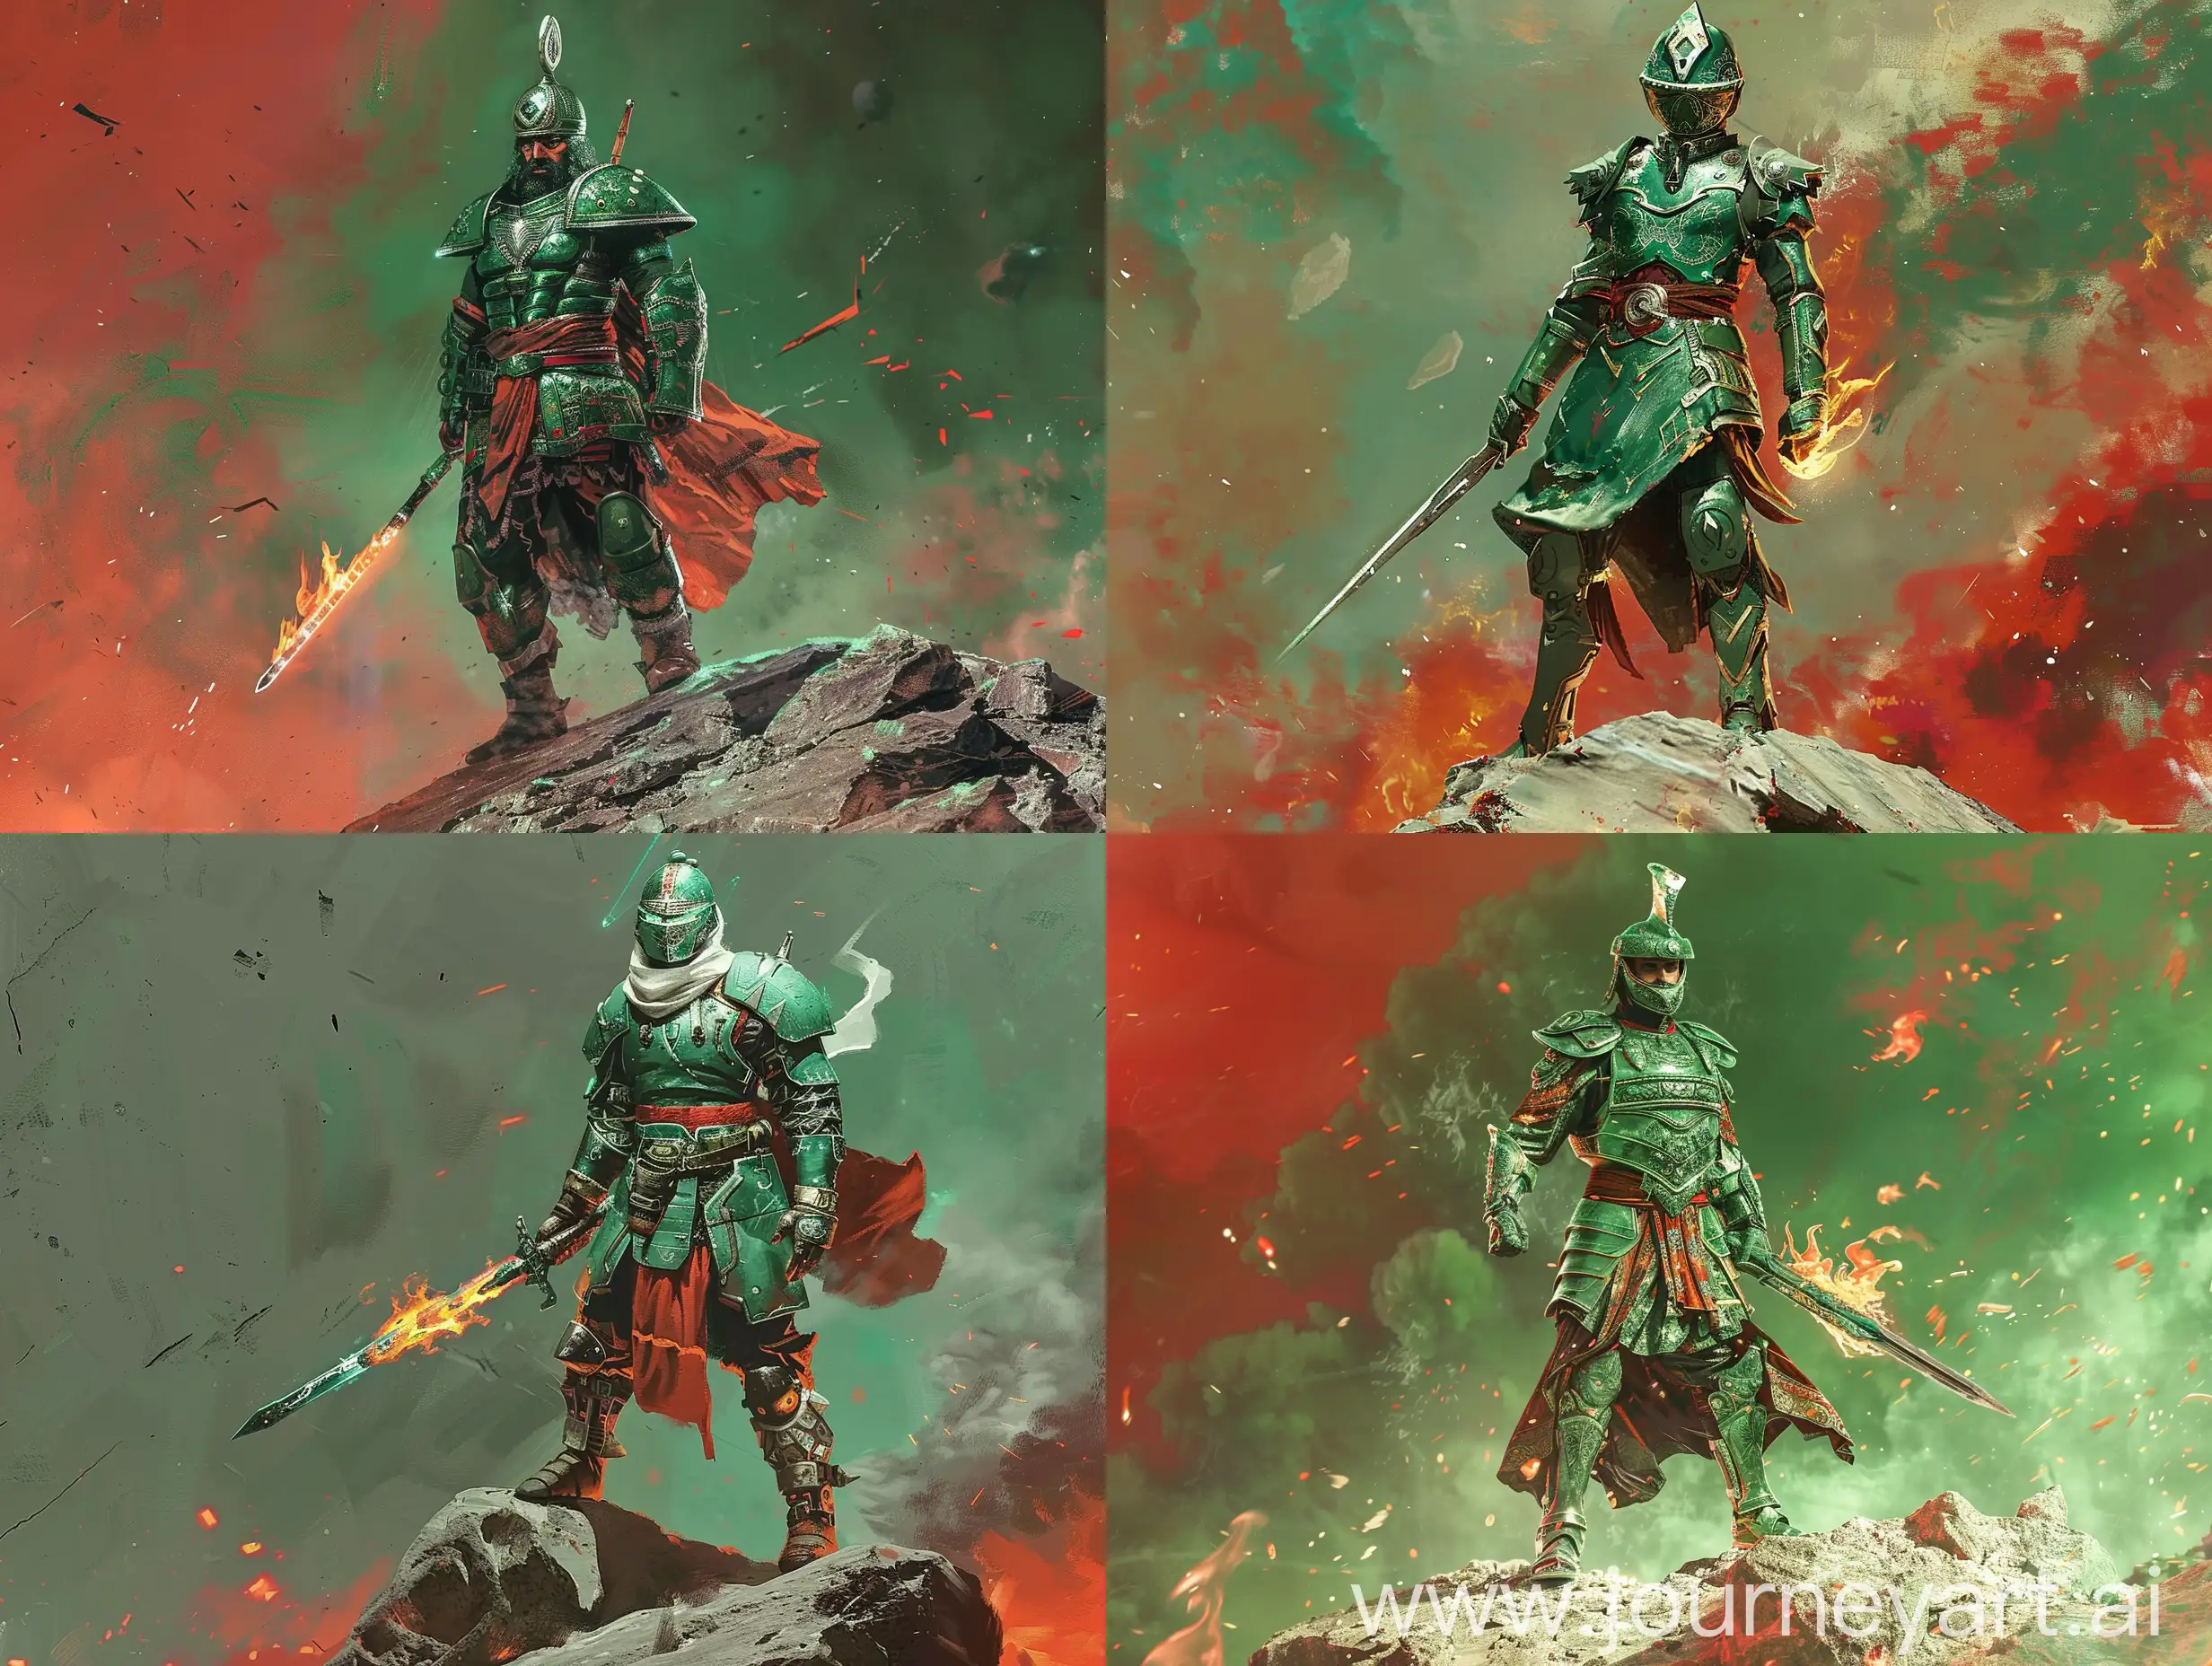 A Persian Sci-Fi Military Officer, Metal Green Armor, Persian Ancient Helmet, Fire Sword Holstered, Standing On A Rock On A War ridden Planet, Green Red And White.